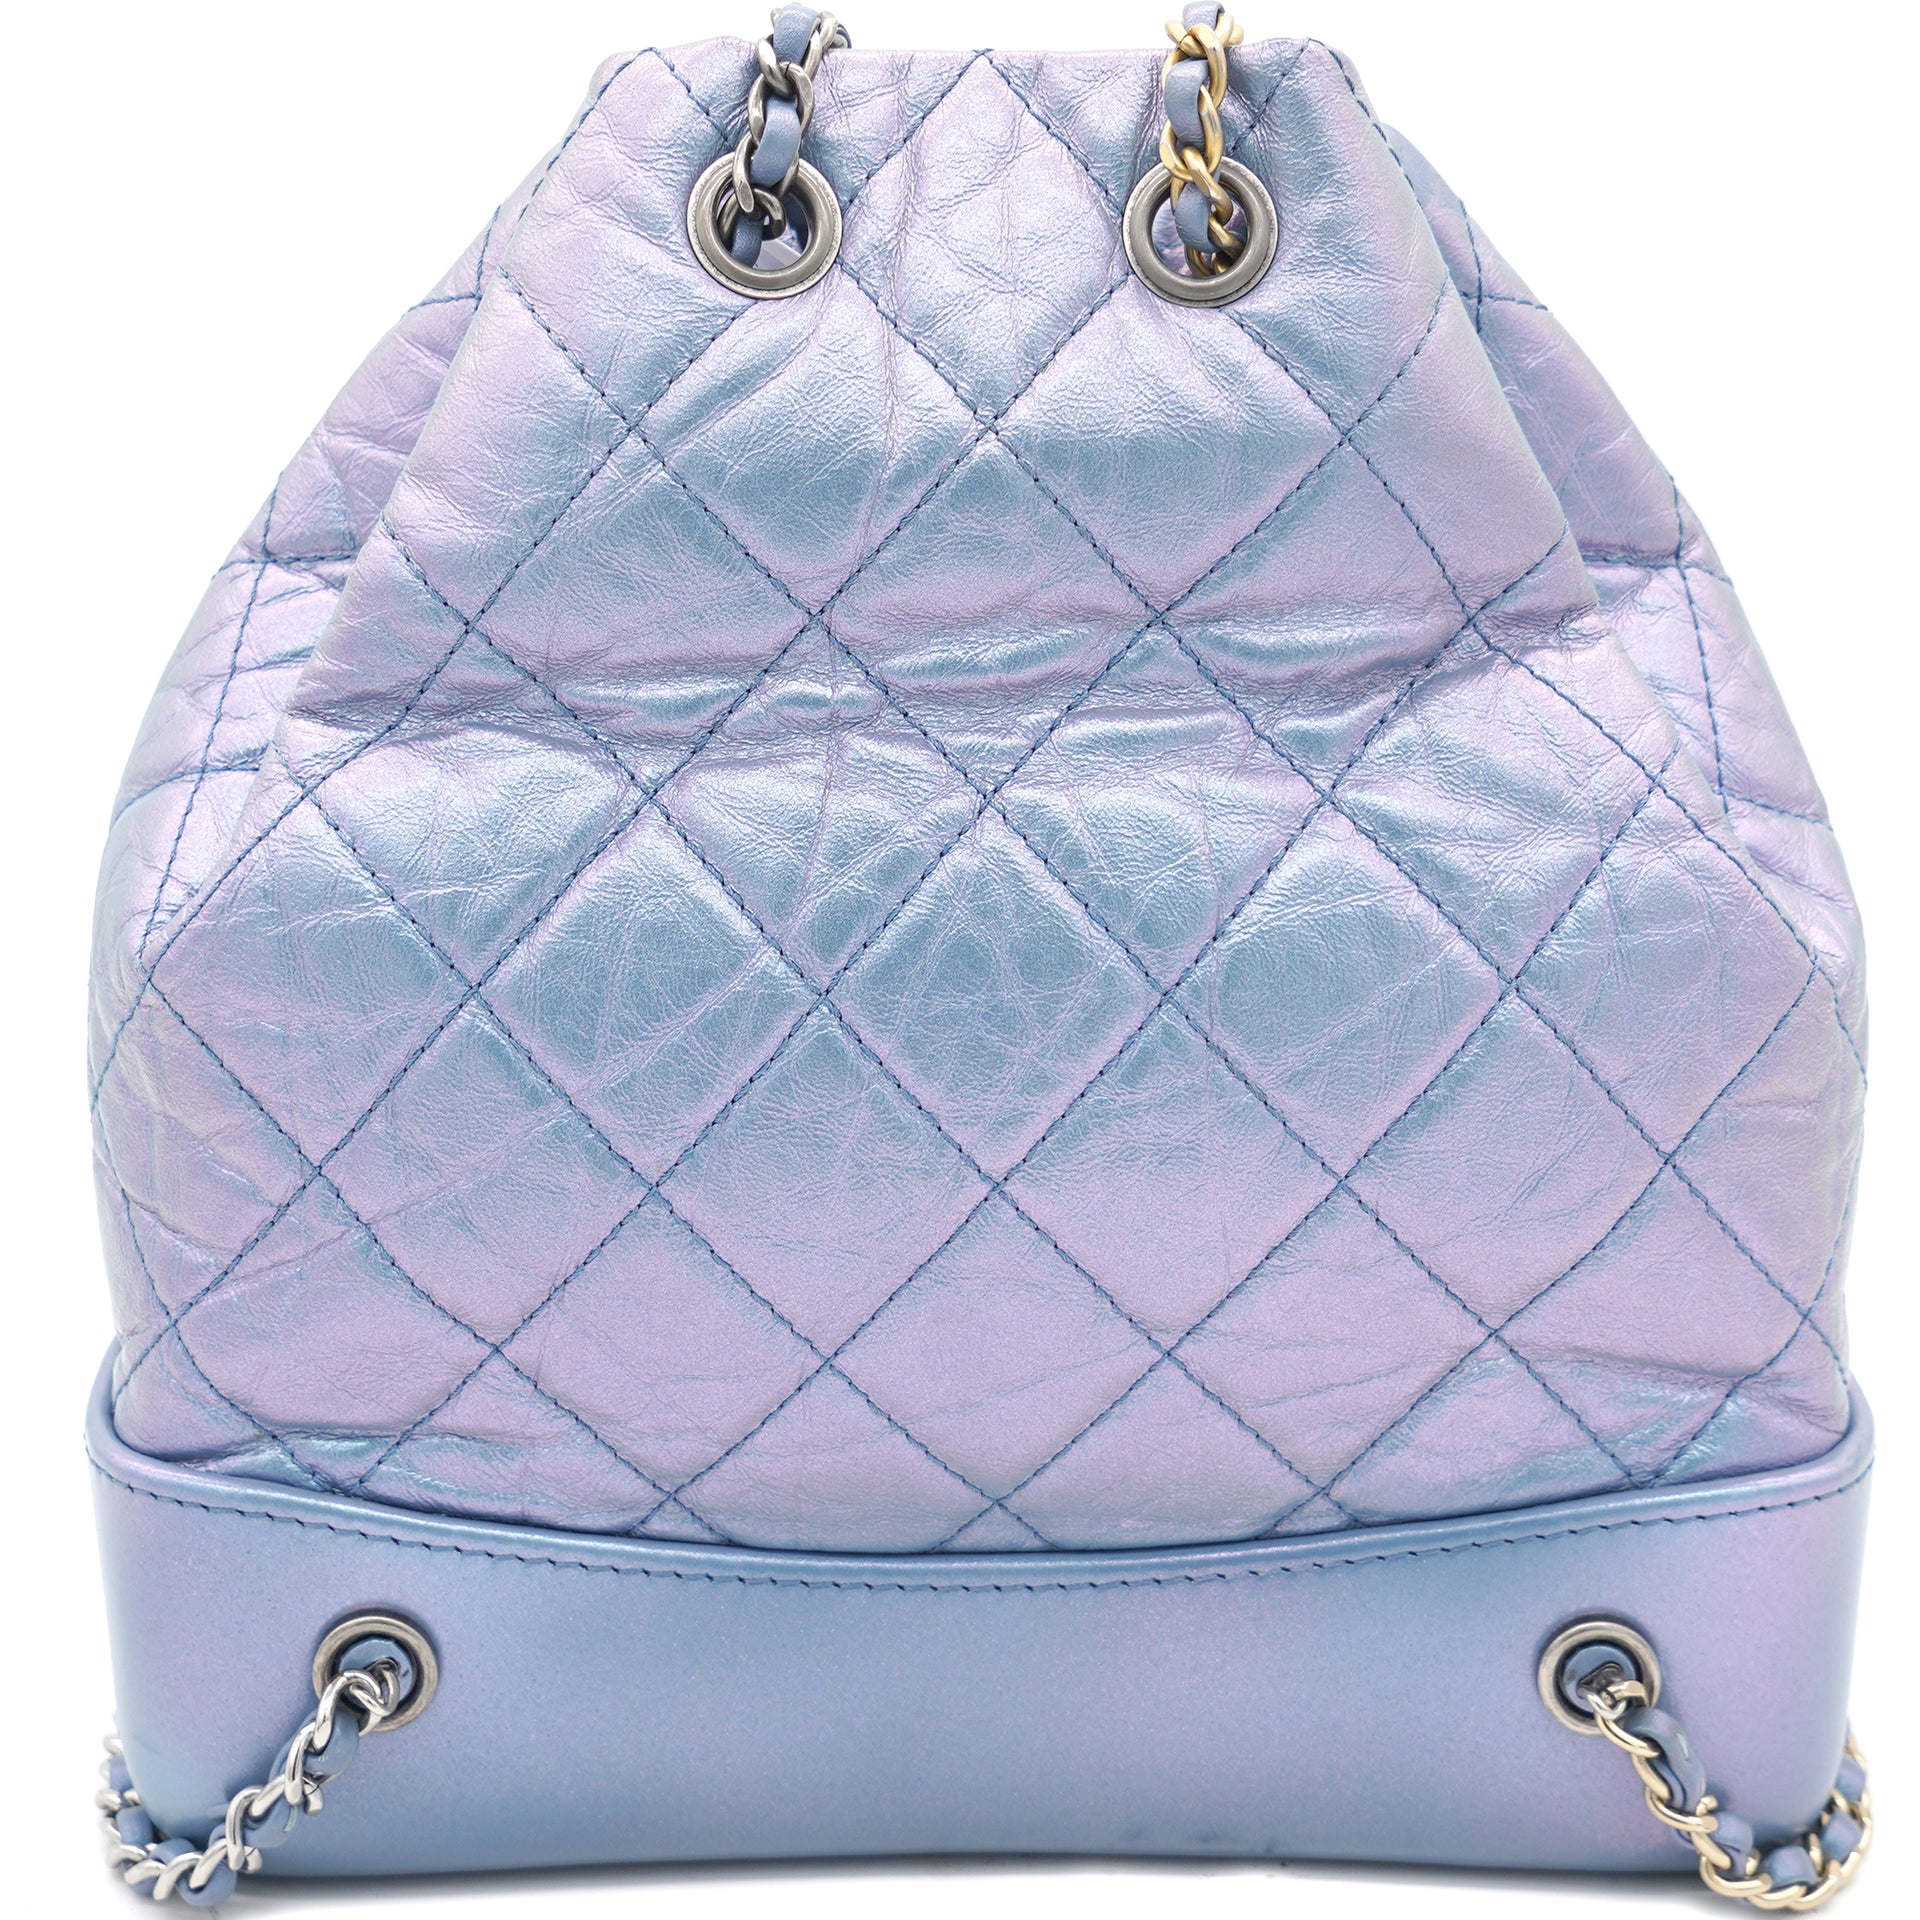 Gabrielle backpack in Purple leather